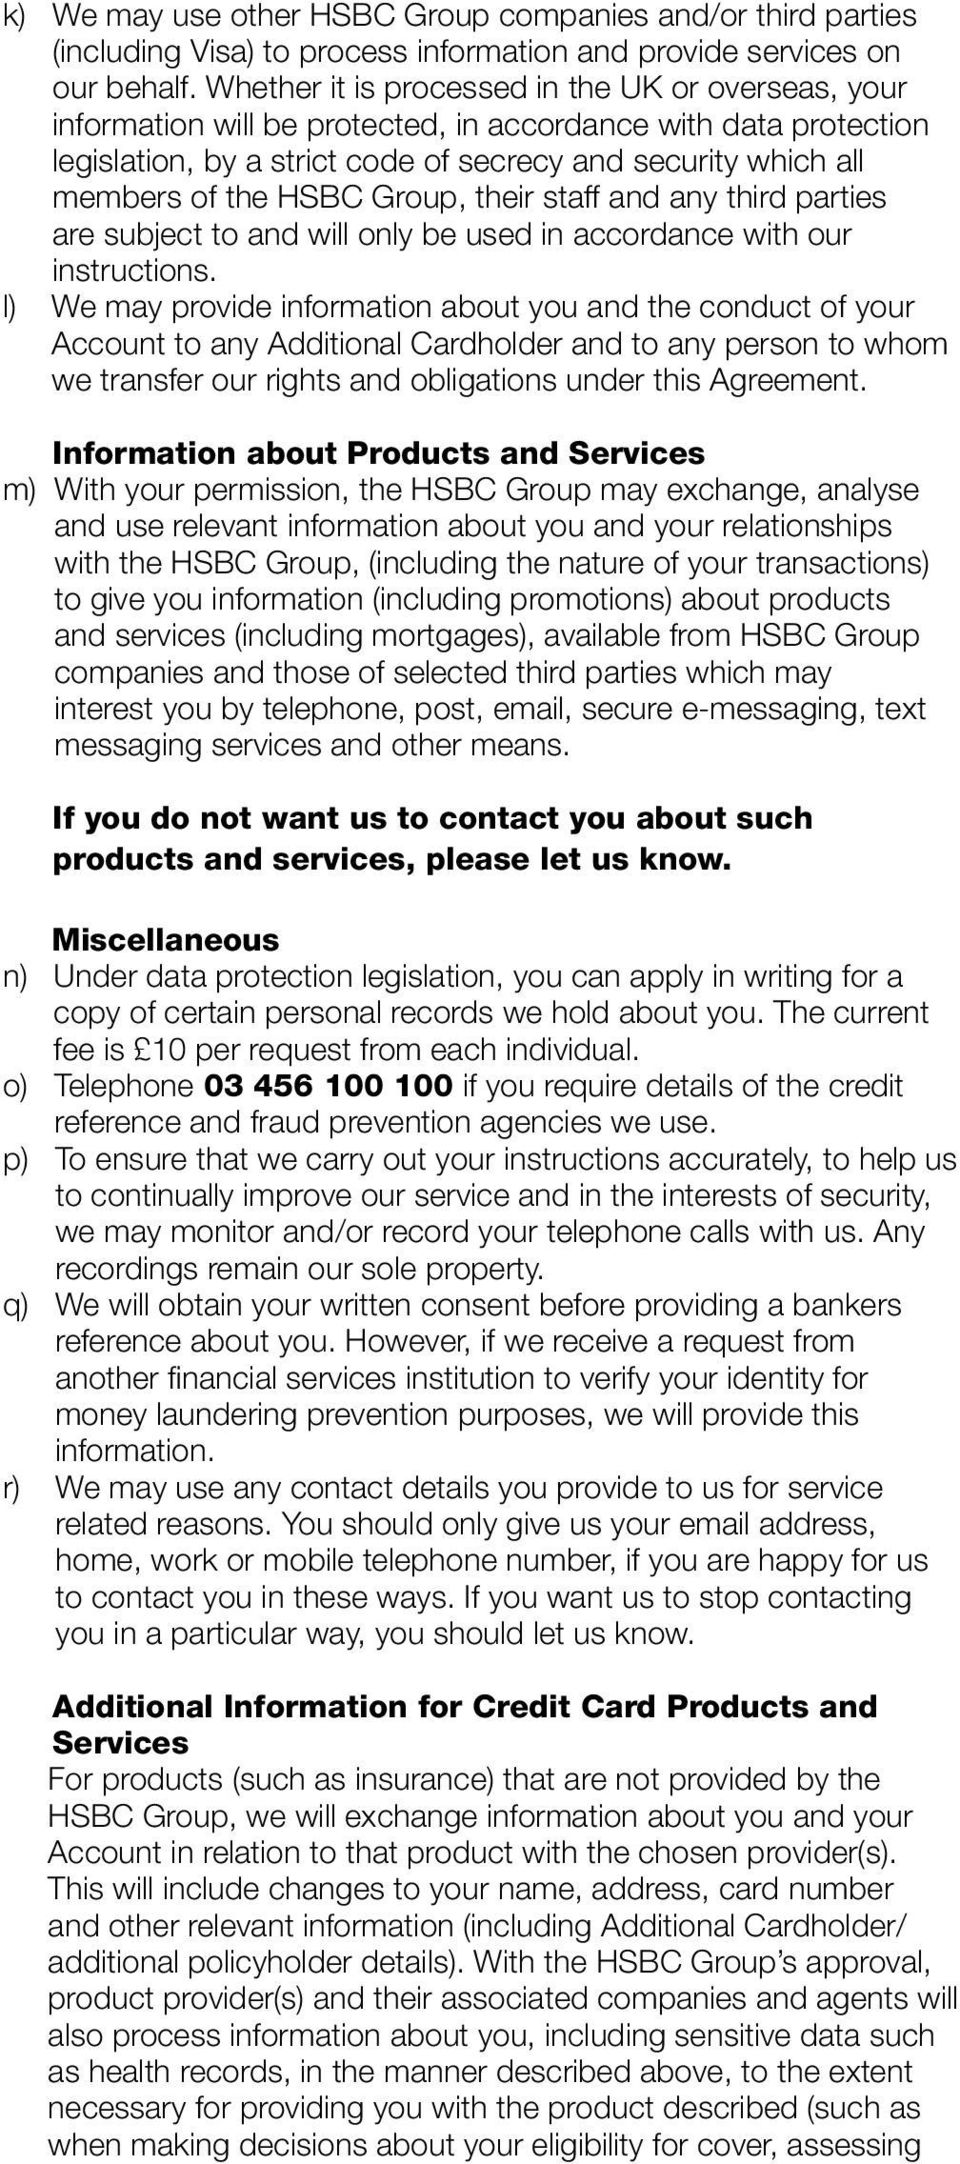 HSBC Group, their staff and any third parties are subject to and will only be used in accordance with our instructions.